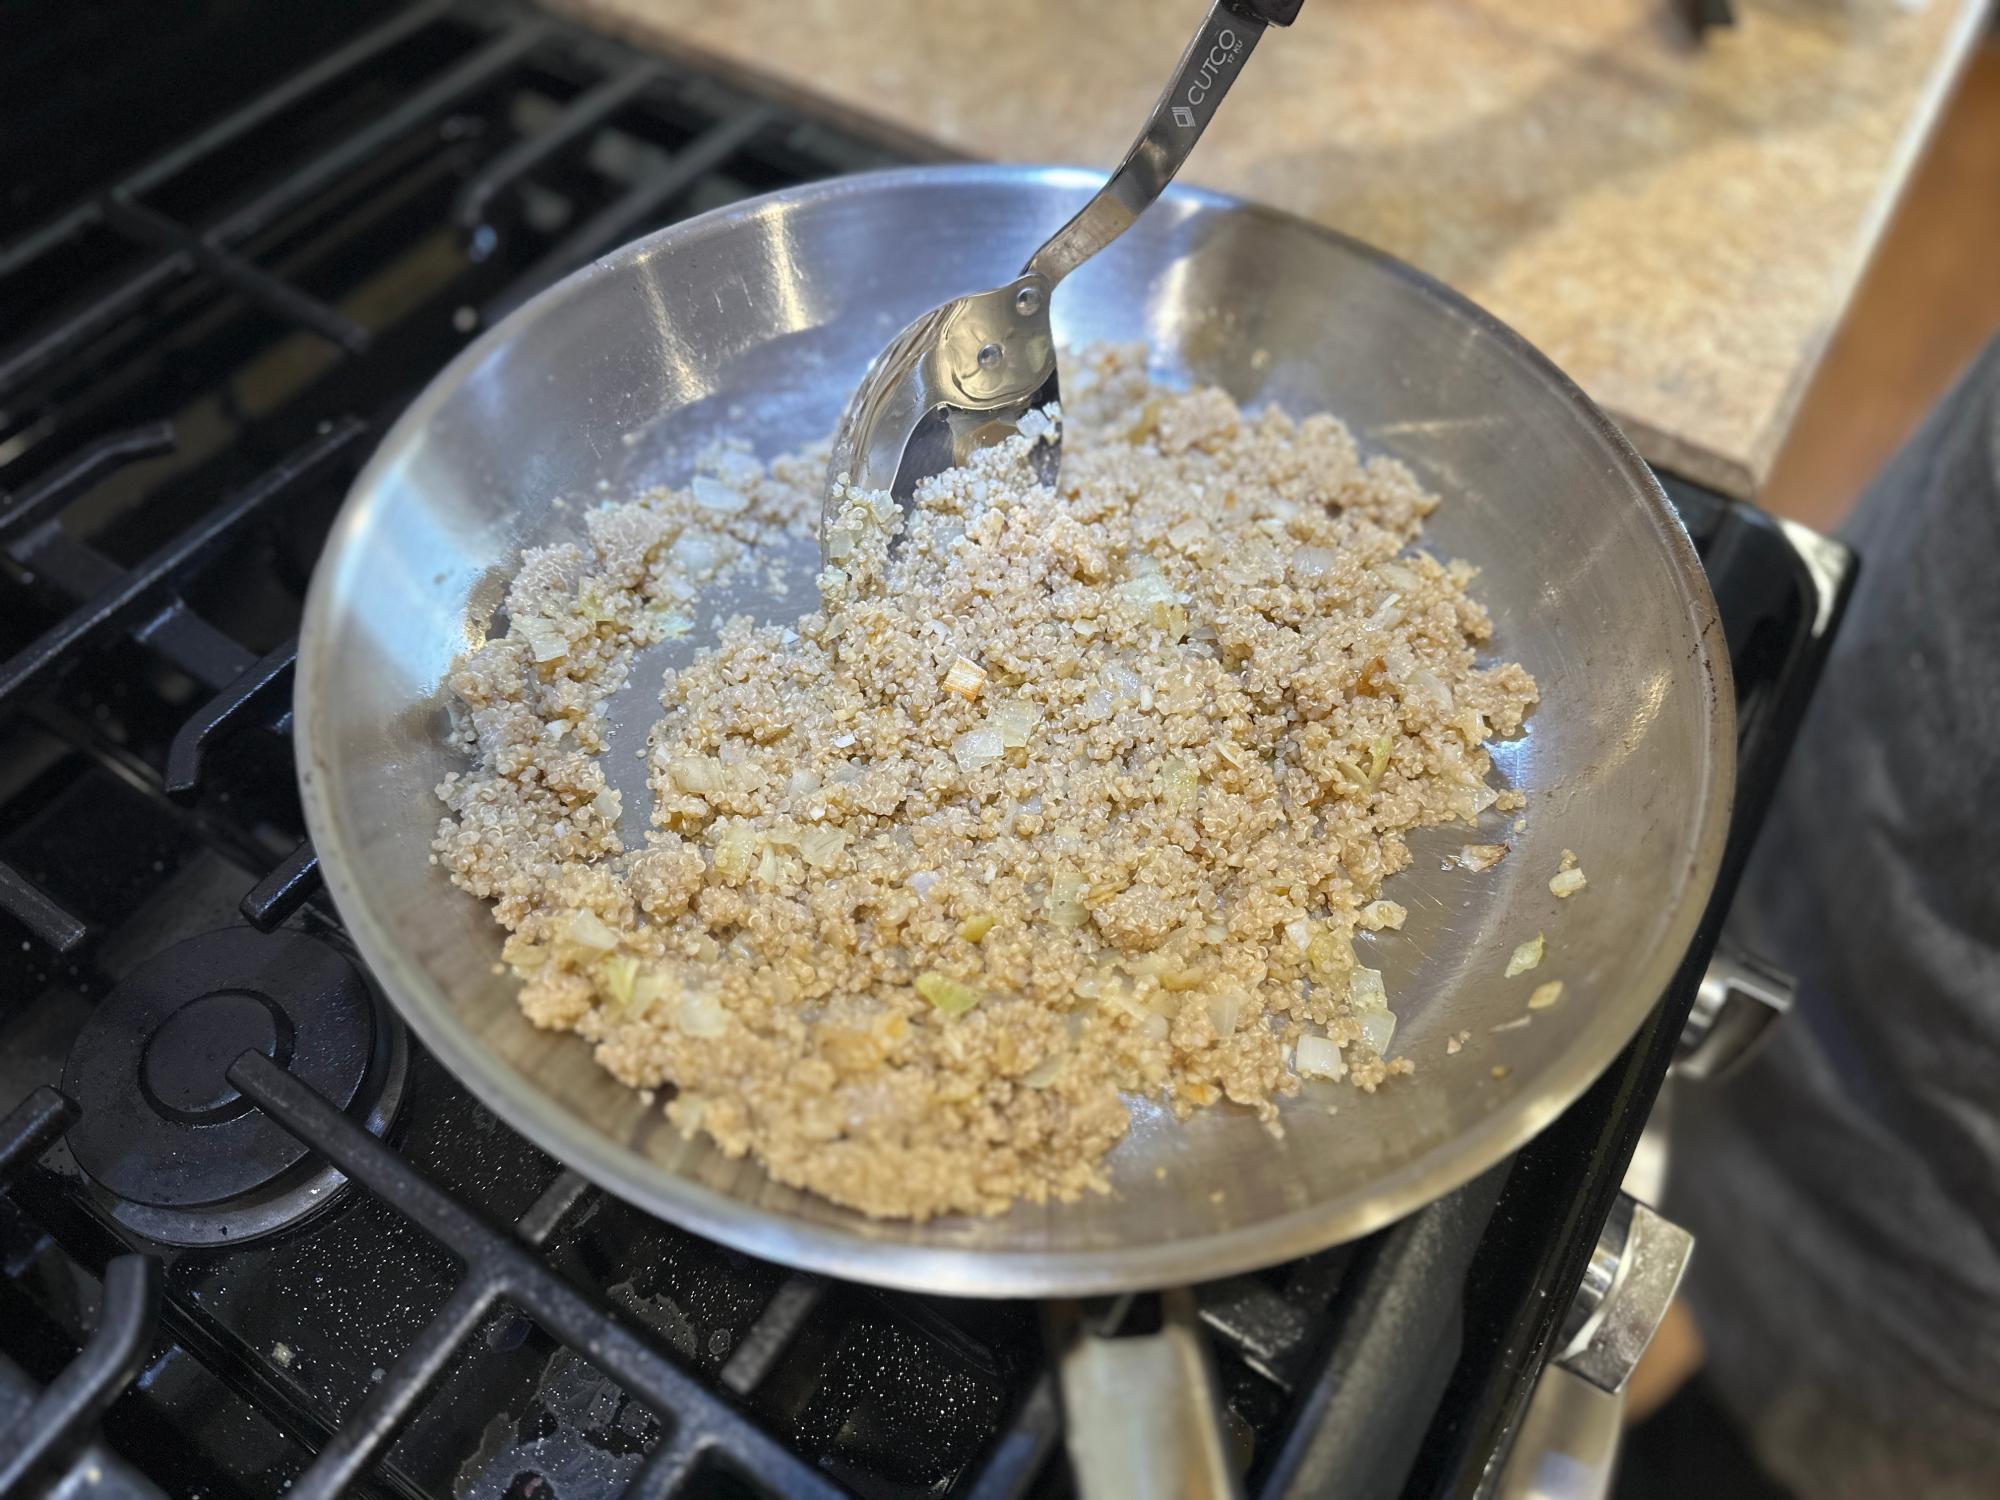  Toasting the quinoa in the pan.